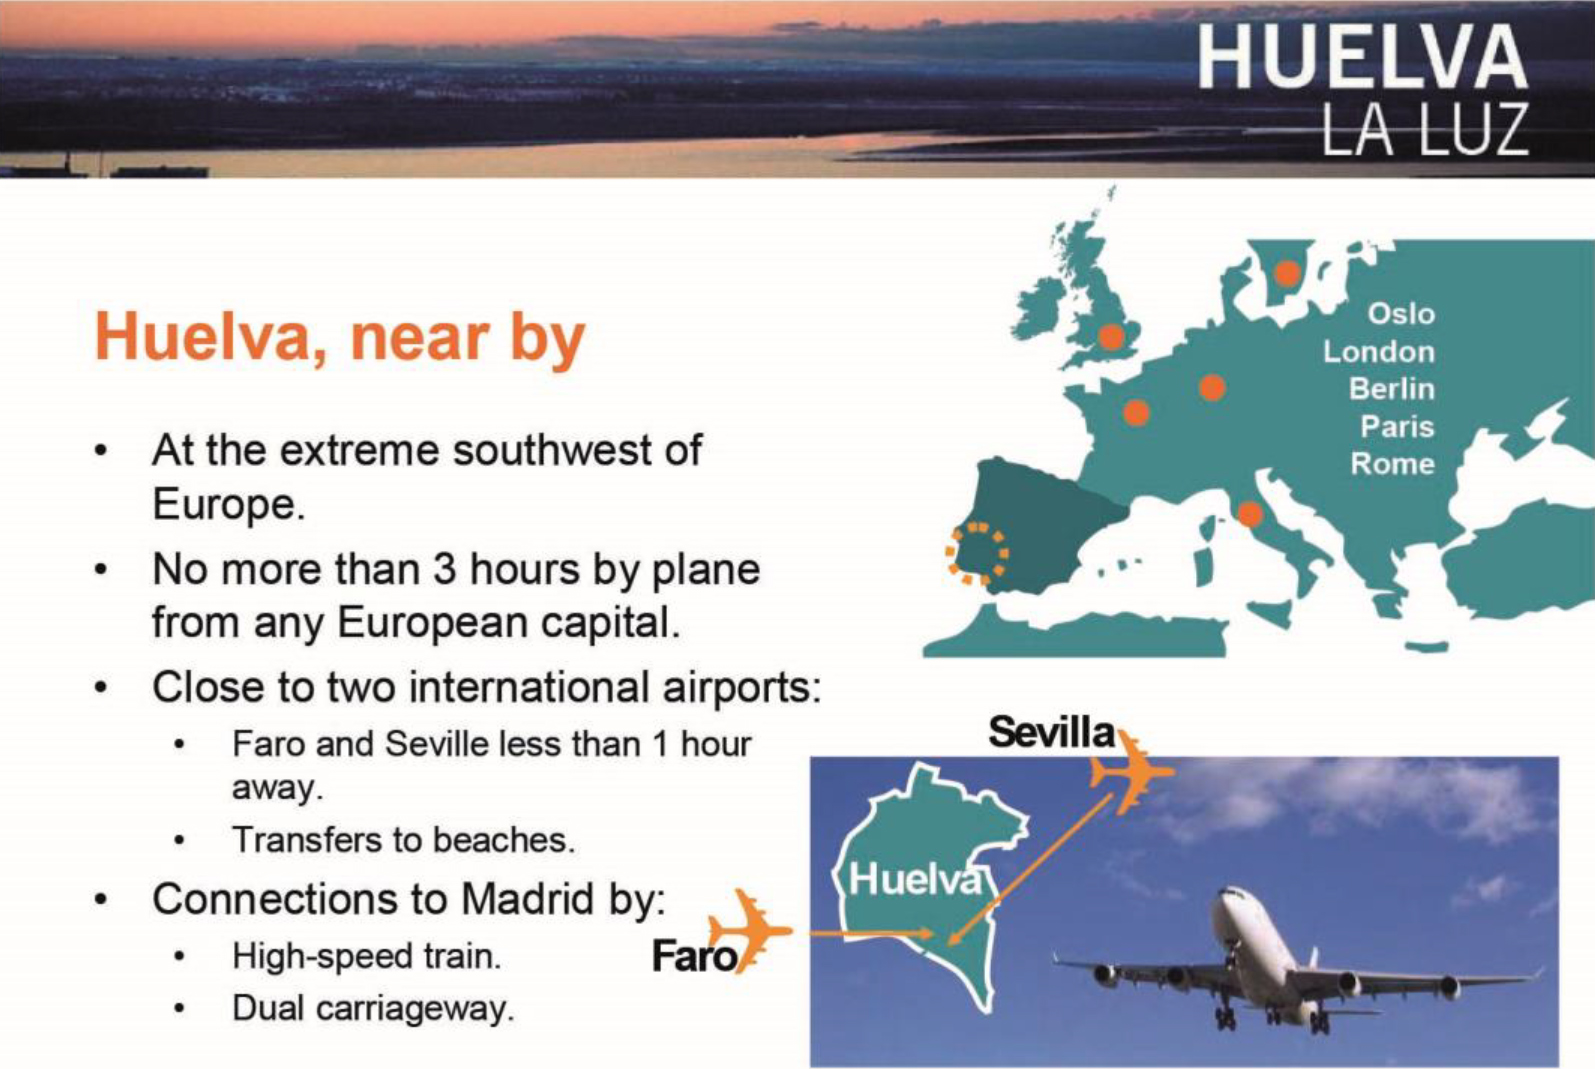 An image shows a map of Europe, an airplane, the location of Huelva, and details of transportation facilities available to other destinations.